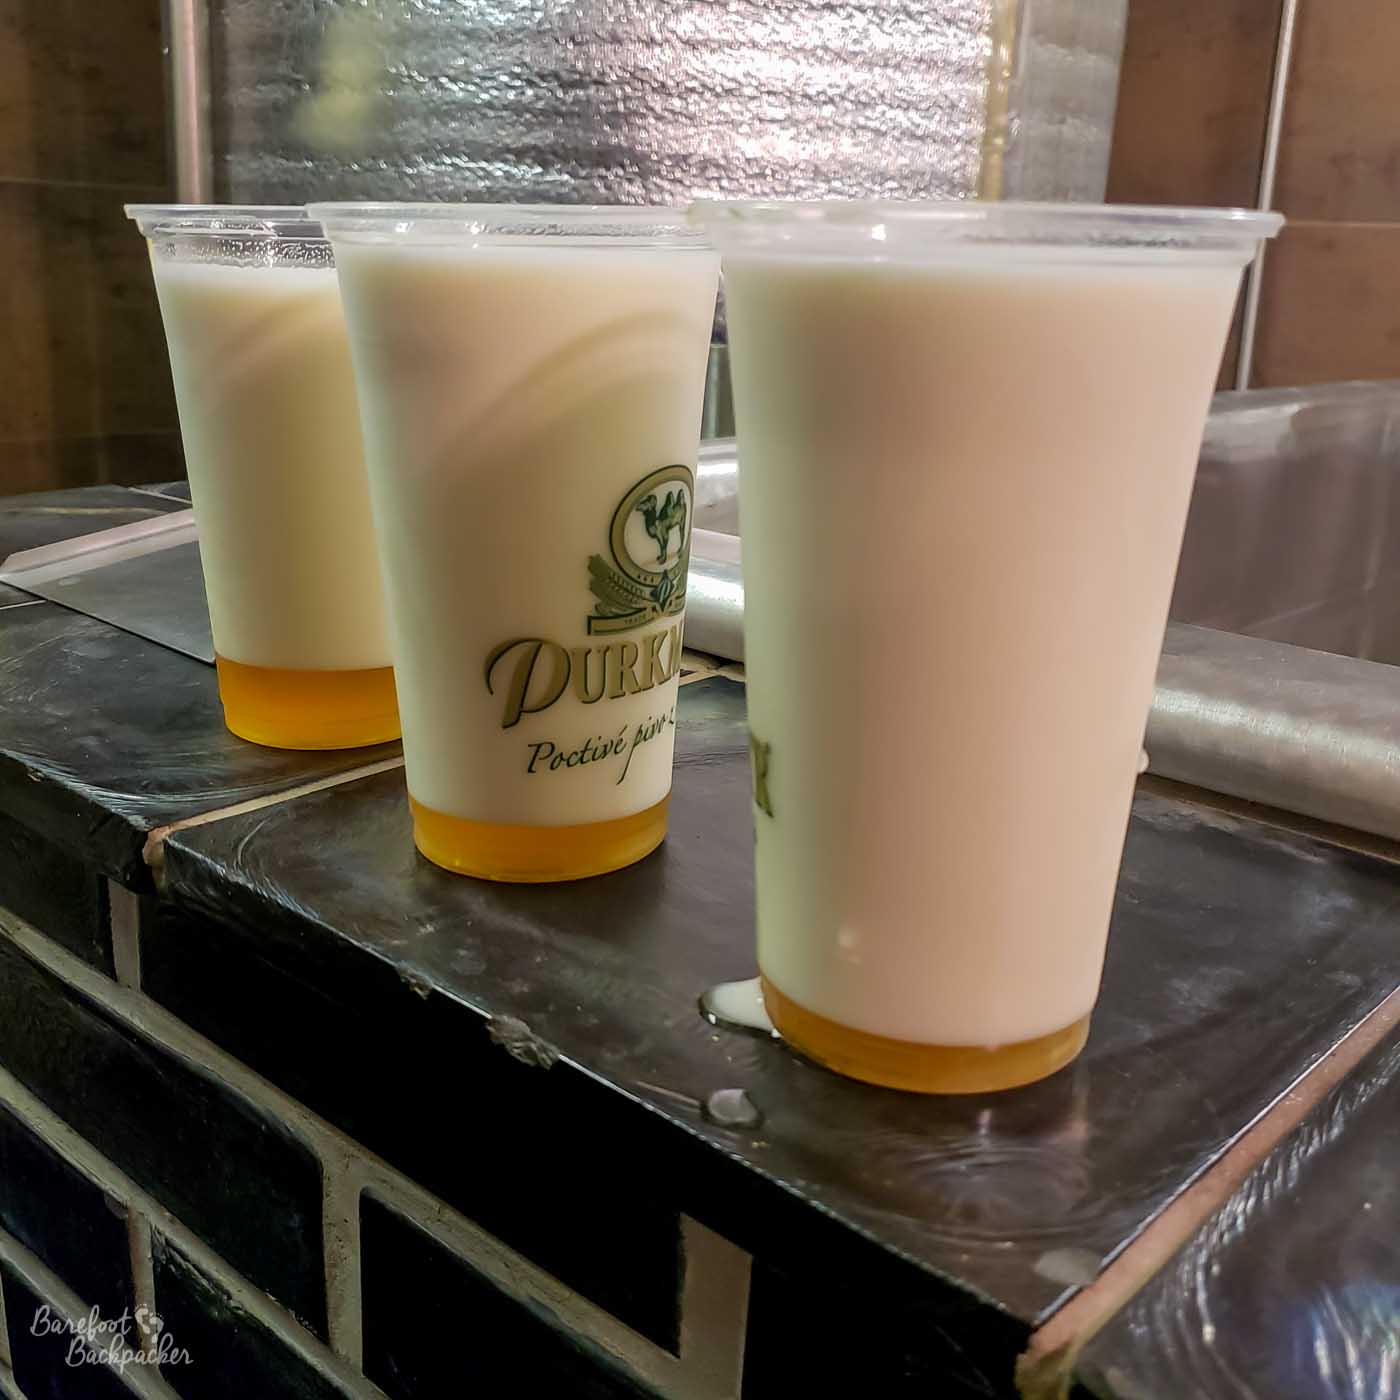 Three large plastic glasses of the Mliko beer style on a tiled shelf.